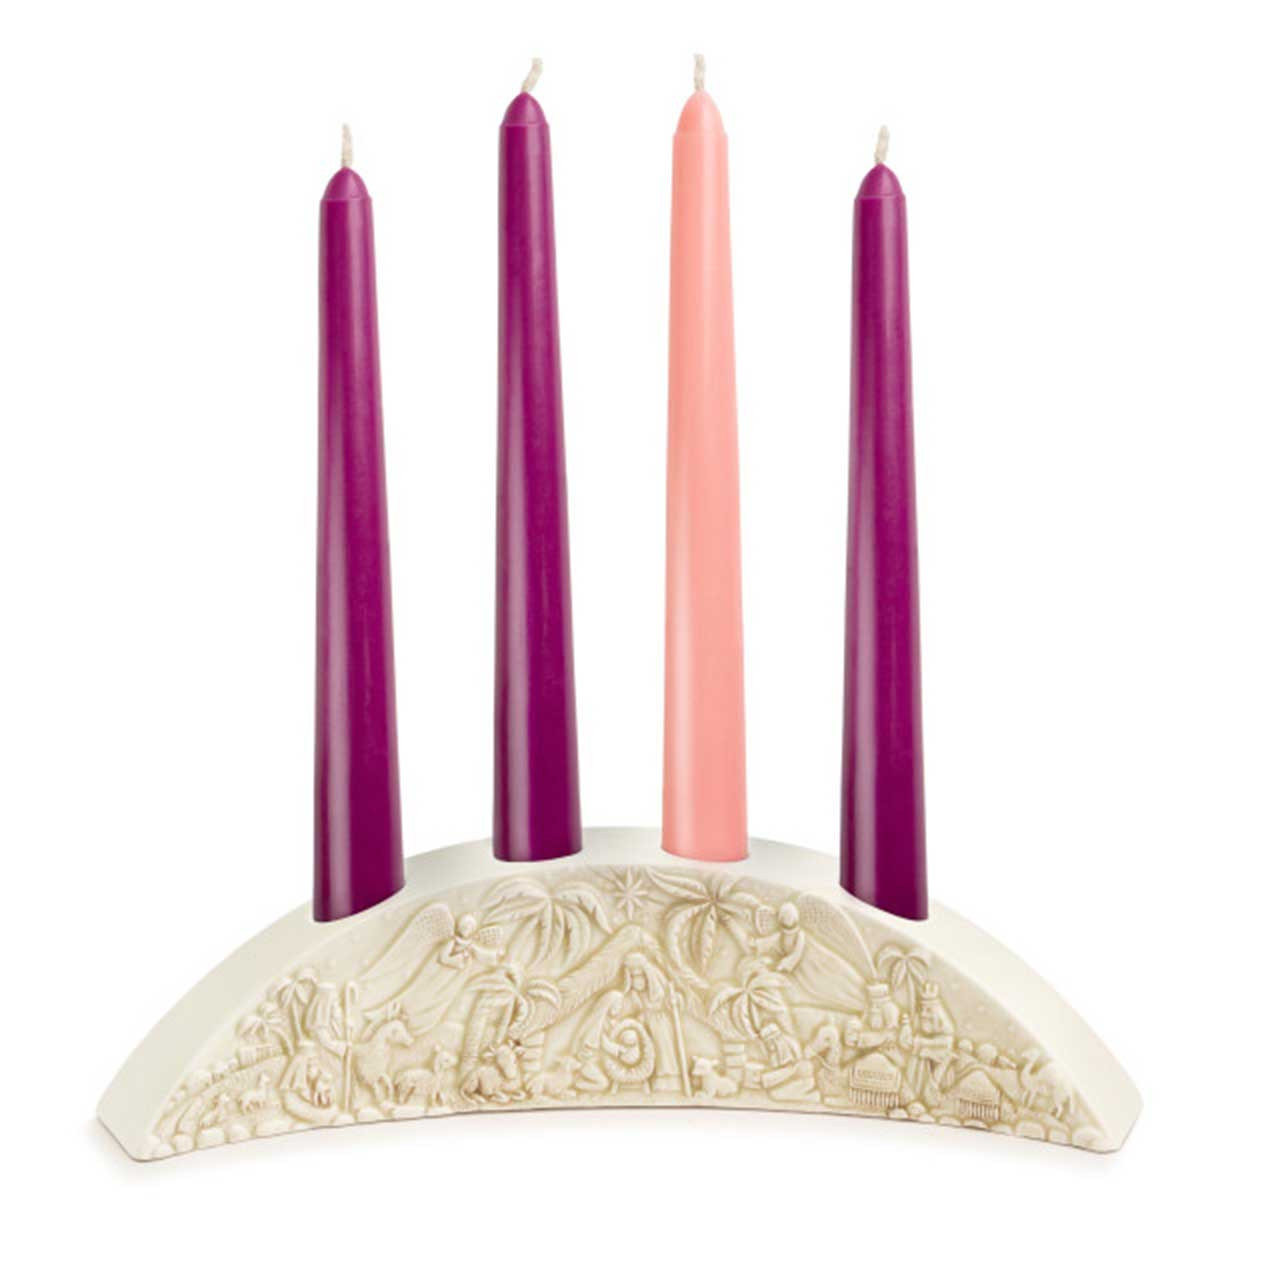 Ceramic Advent Candle Holder from DEMDACO shown with candles that are purchased separately